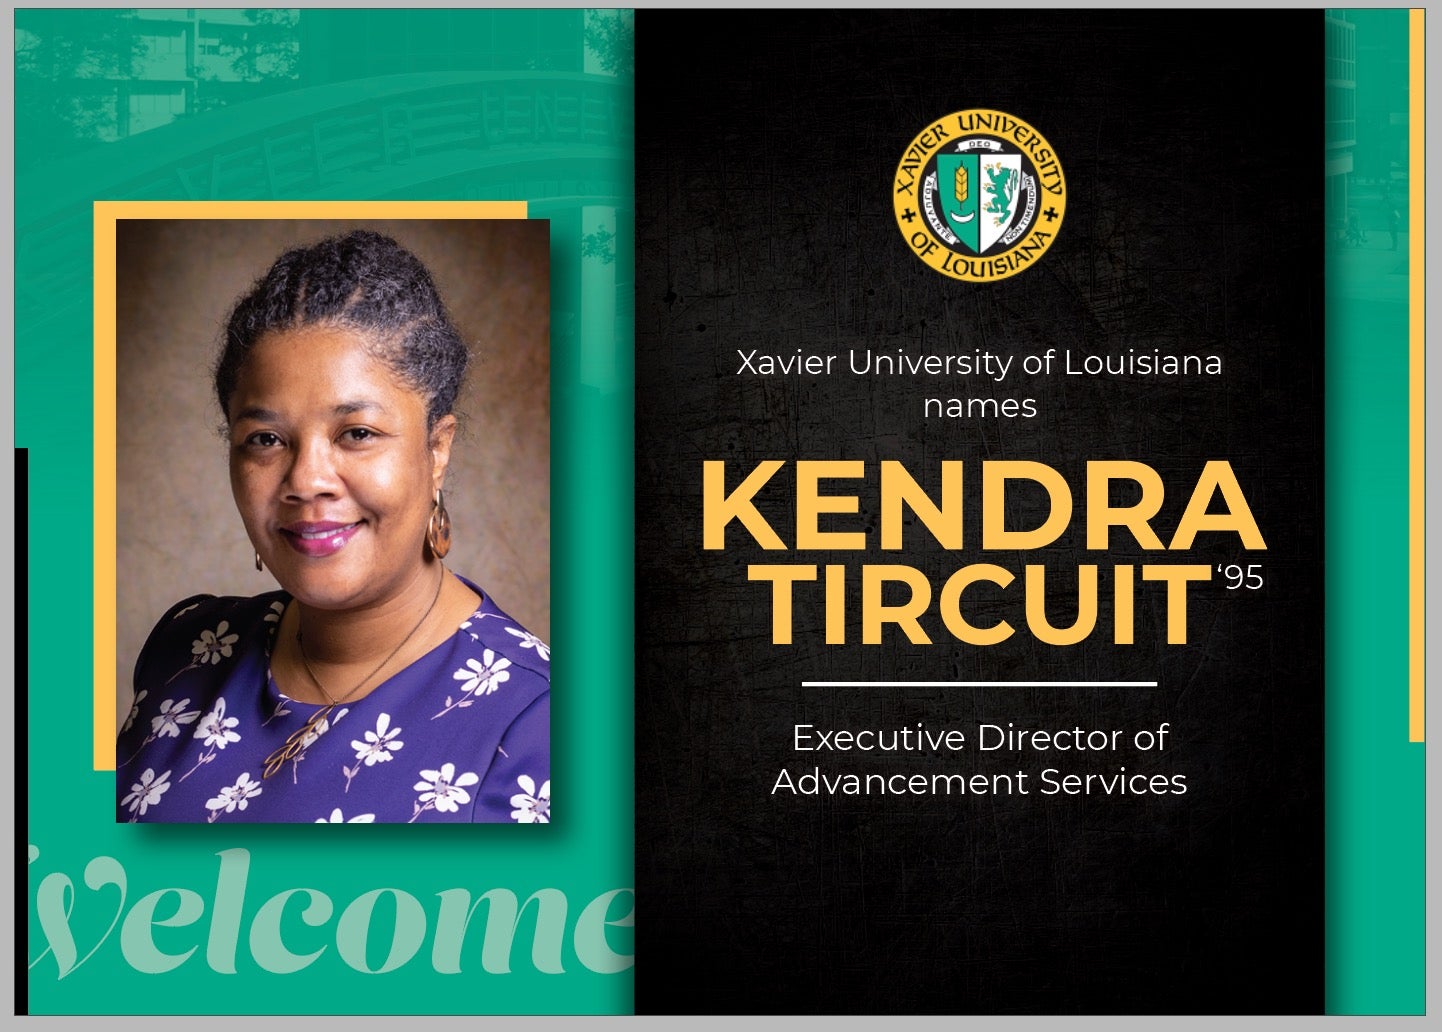 Kendra Tircuit Executive Director of Advancement Services